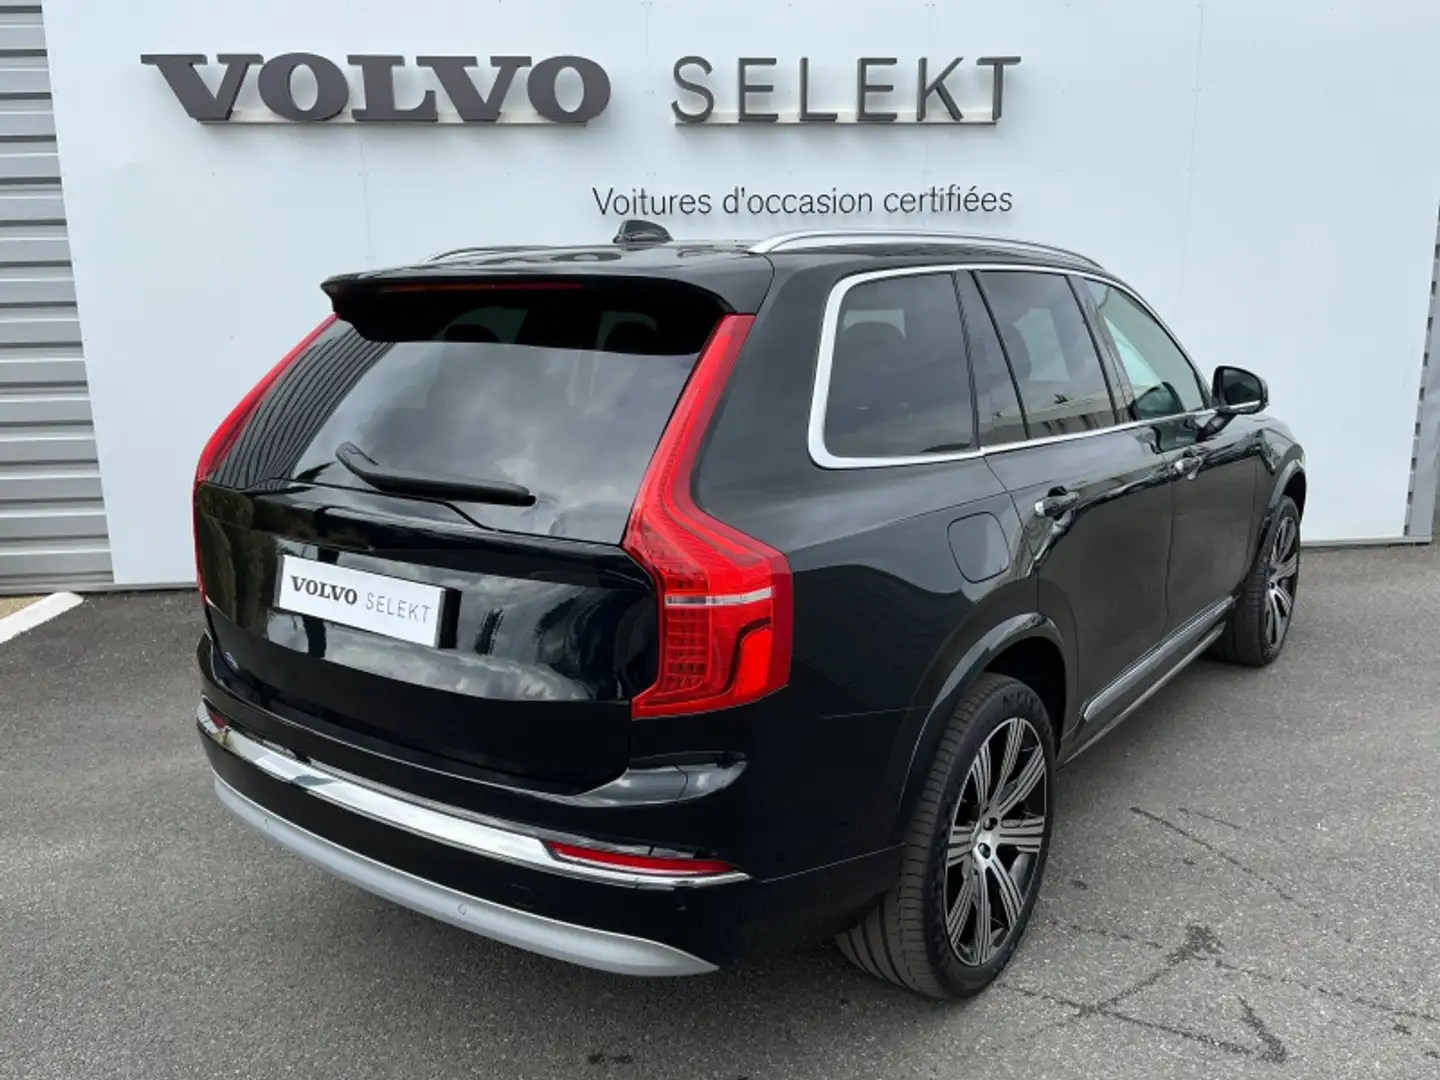 Volvo XC90 T8 AWD 303 + 87ch Inscription Luxe Geartronic - 2